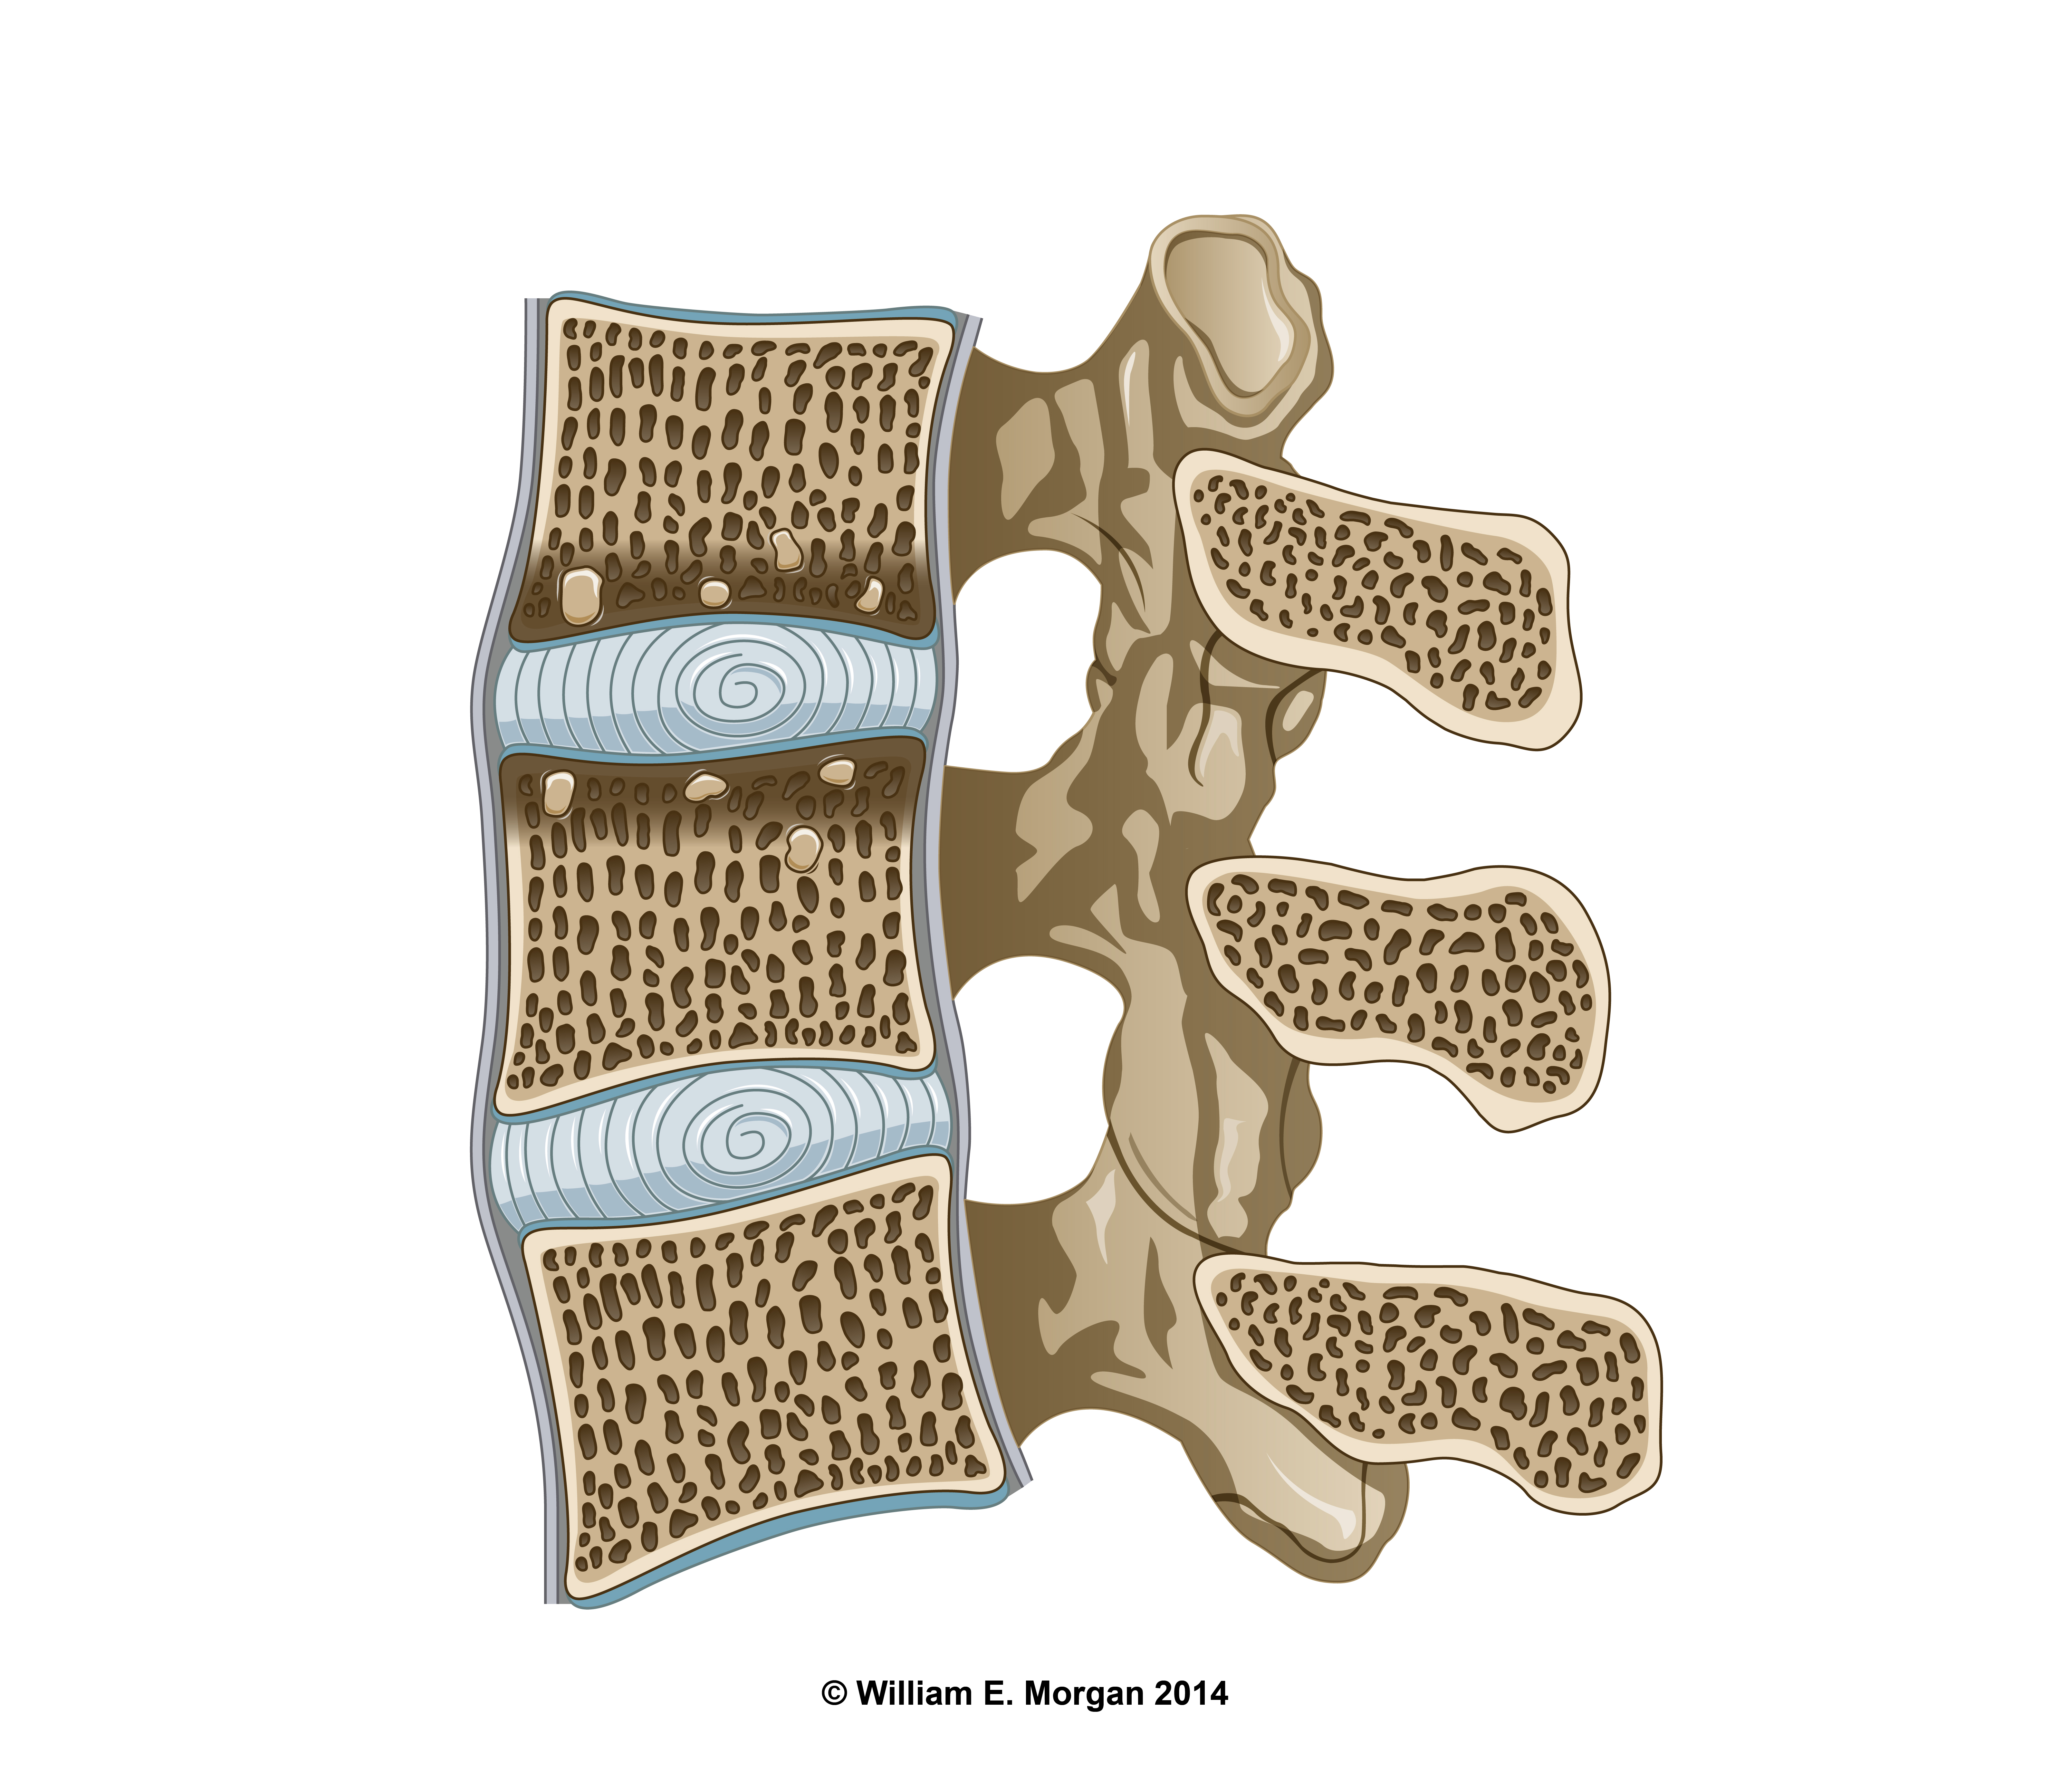 Sclerotic changes of the cortical bone and thickening of the endplates are indicative of Modic 3 changes. 